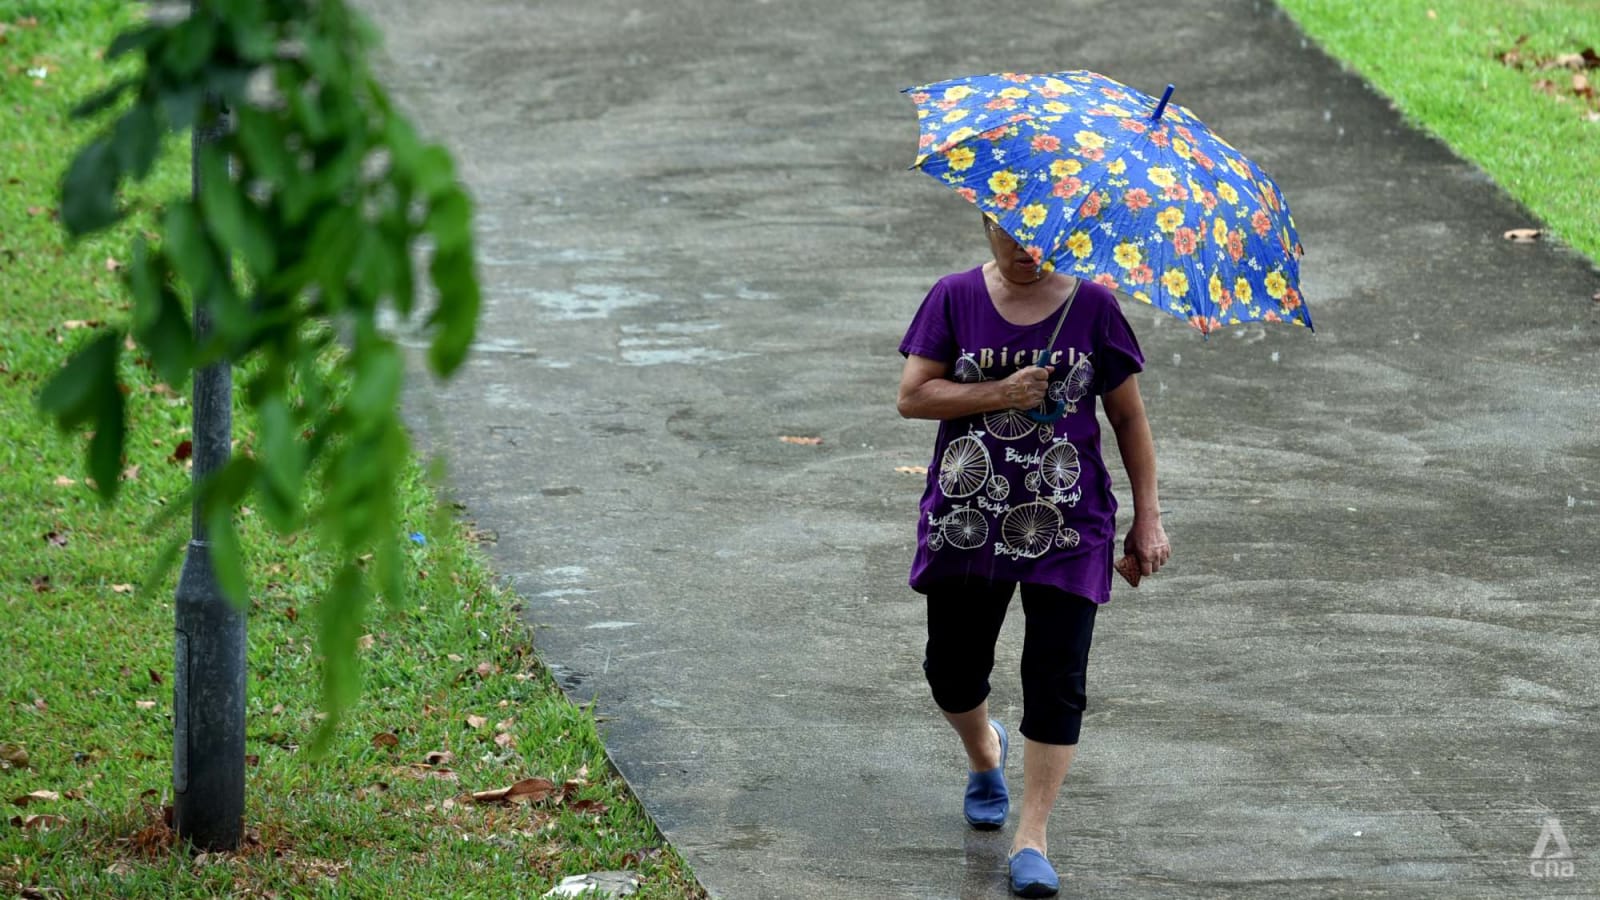 Thundery showers expected to continue into first half of March: Met Service